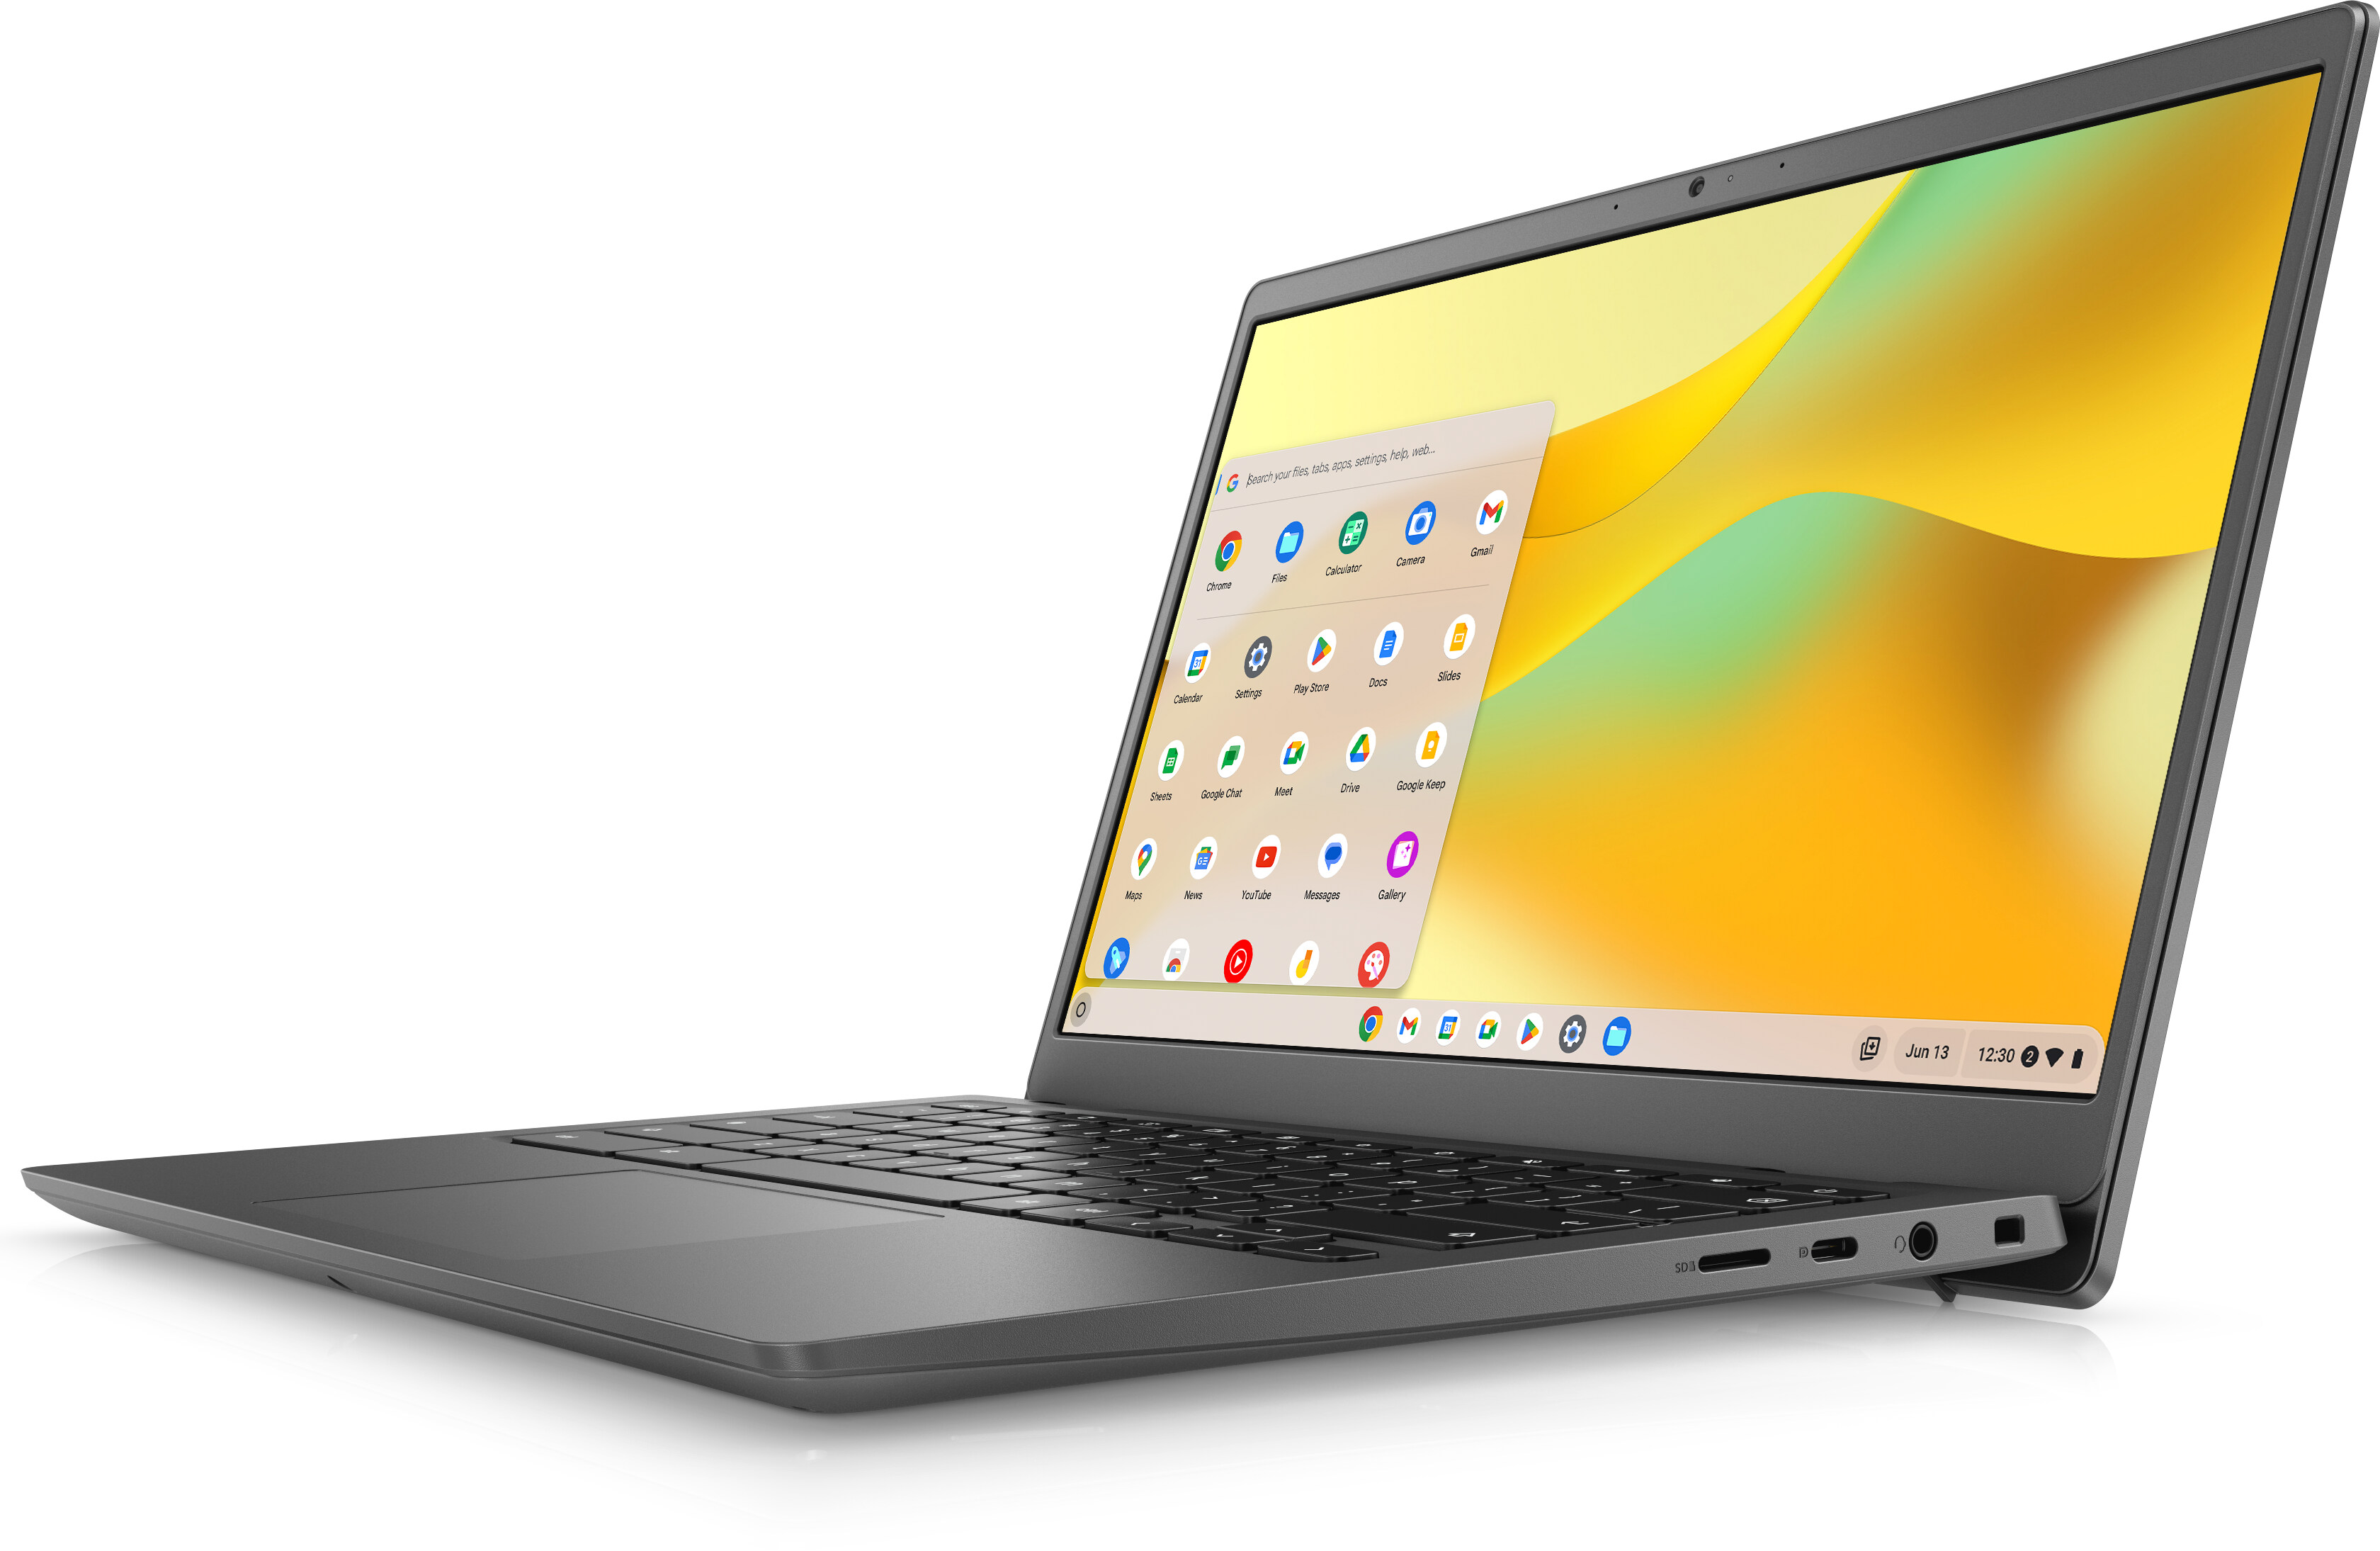 https://i.dell.com/is/image/DellContent/content/dam/ss2/product-images/dell-client-products/notebooks/chromebook/chromebook-3445/media-gallery/launcher/laptop-chromebook-14-3445-gray-gallery-5.psd?fmt=pjpg&pscan=auto&scl=1&wid=3360&hei=2189&qlt=100,1&resMode=sharp2&size=3360,2189&chrss=full&imwidth=5000